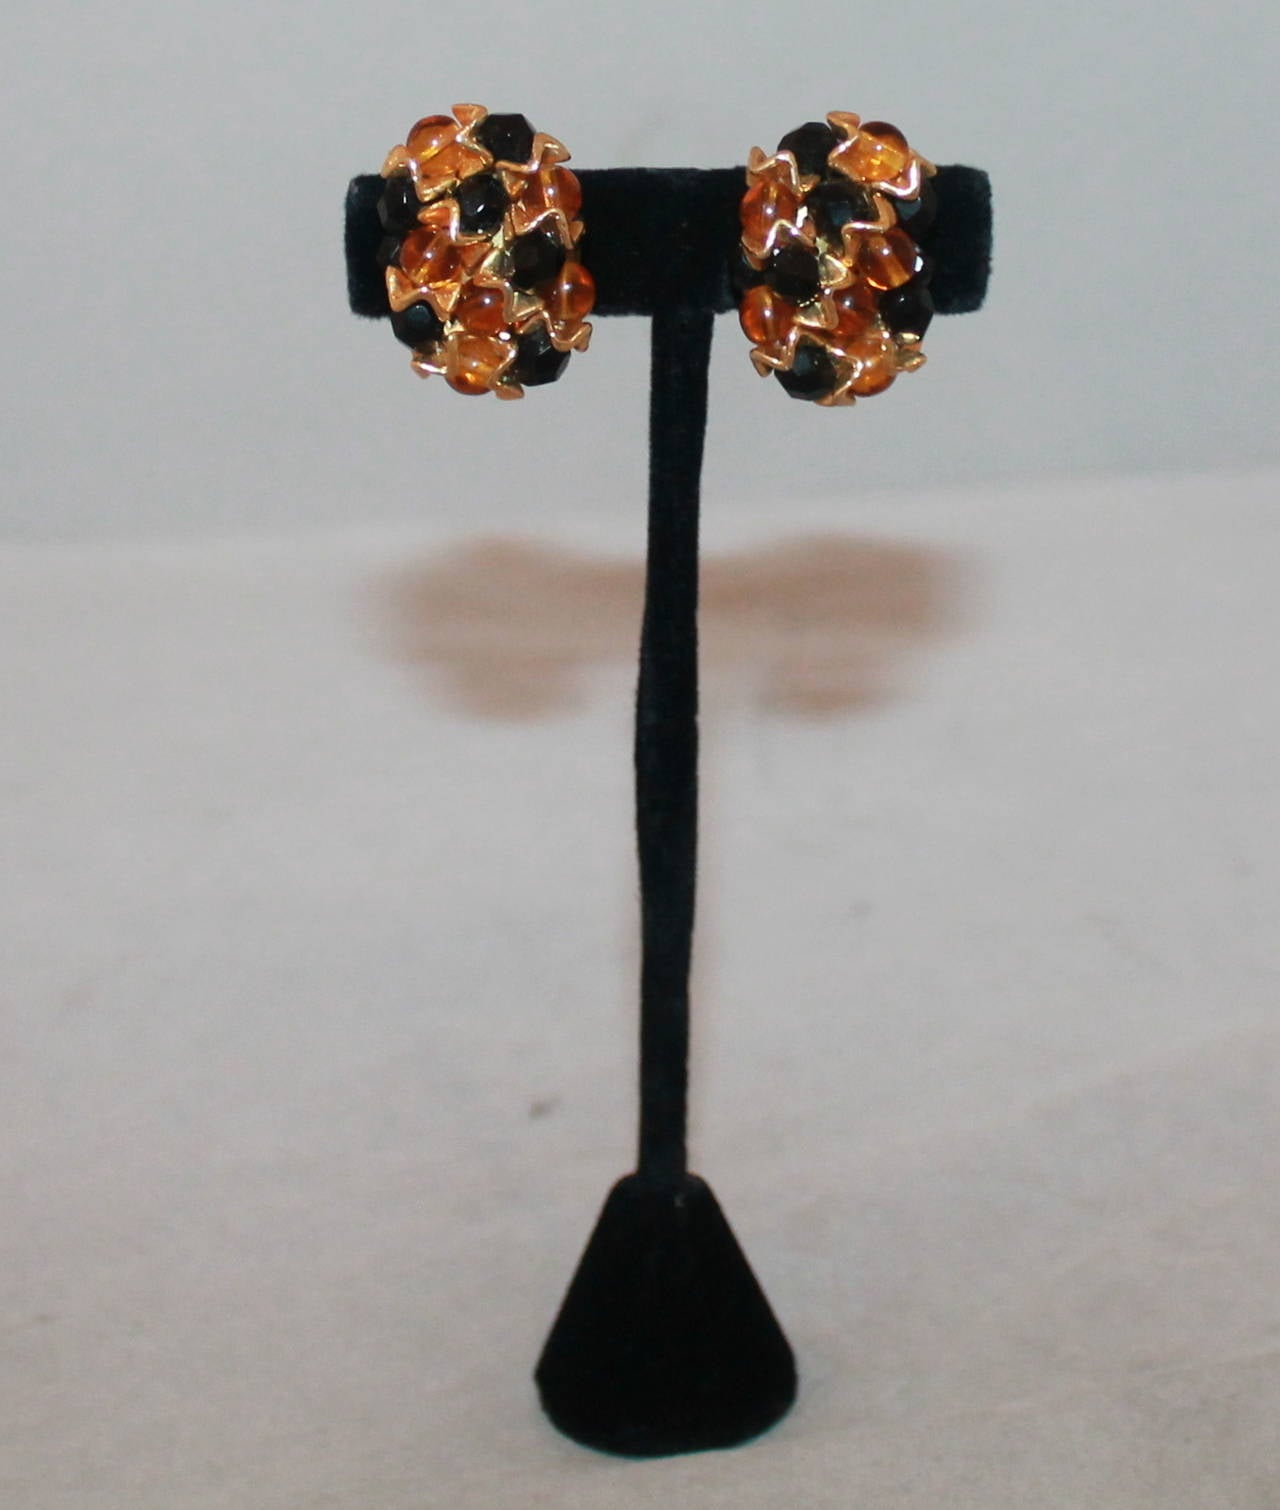 1960's Vintage Amber & Black Beaded Geometric Design Clip-ons. These earrings are in very good condition with wear consistent with age.

Length- 1